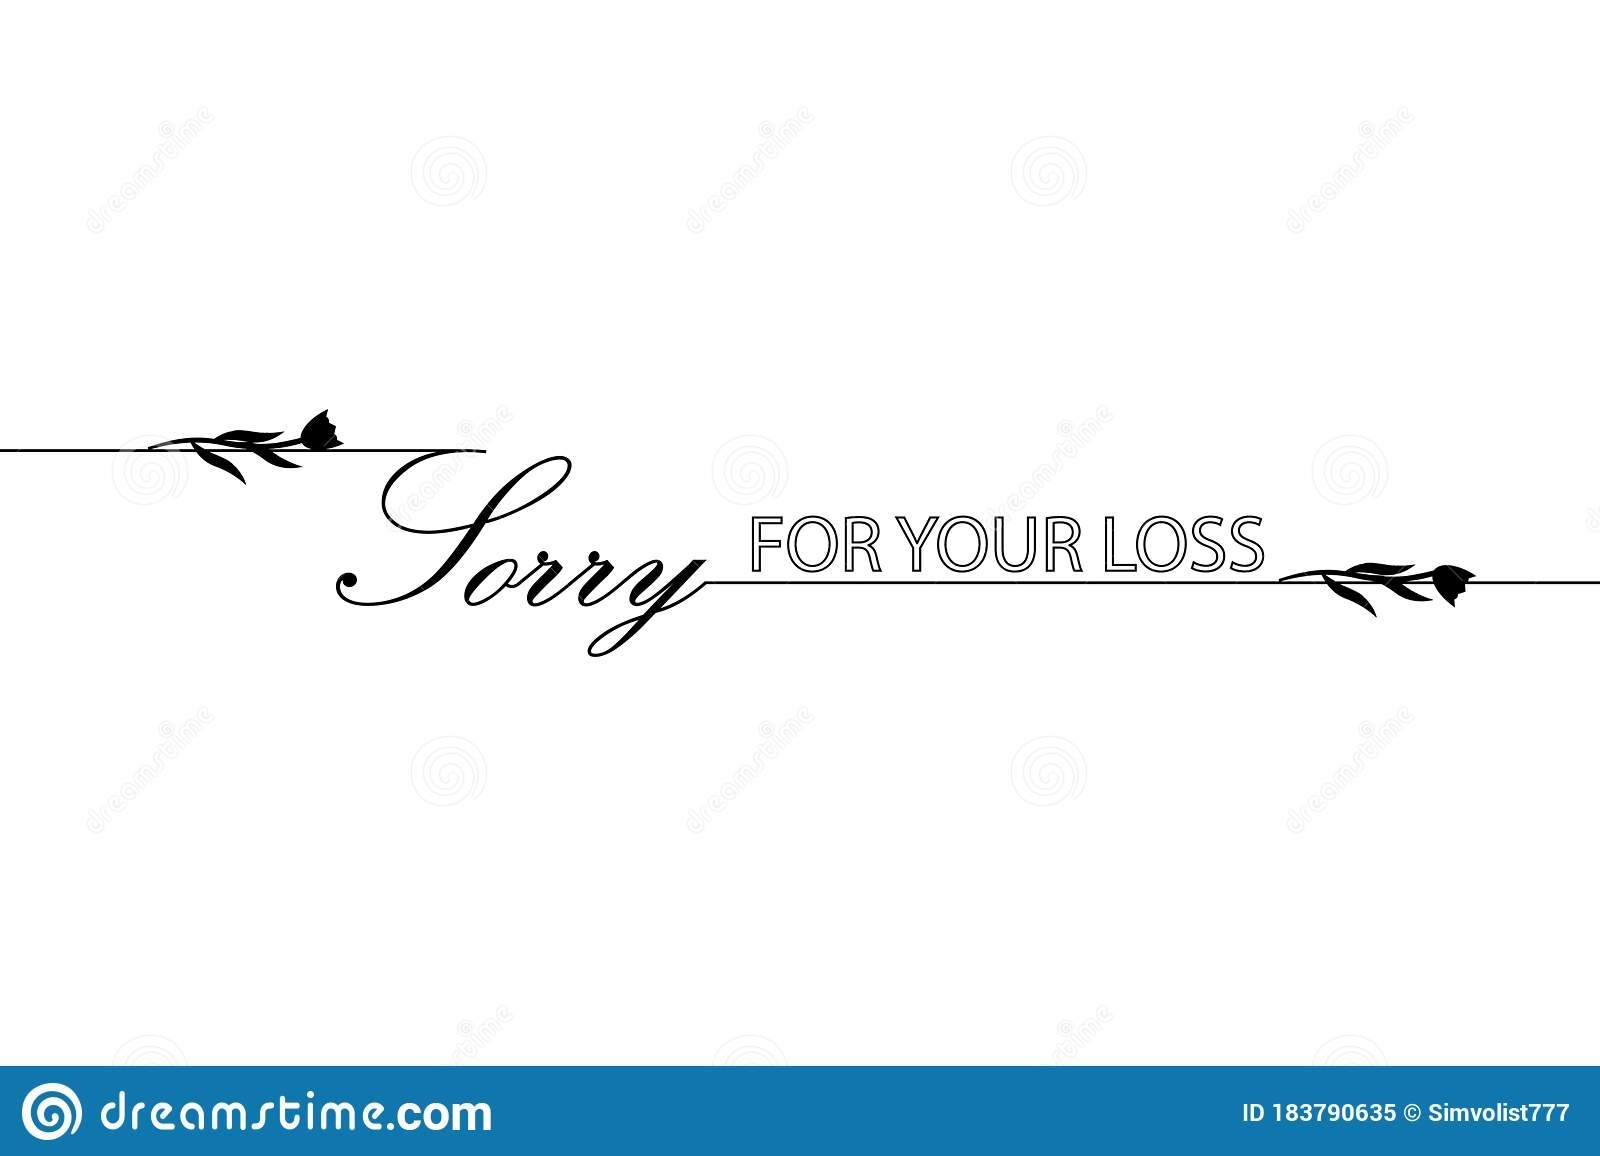 Sorry For Your Loss. Condolences With Black Mourning Flowers. Template Within Sorry For Your Loss Card Template